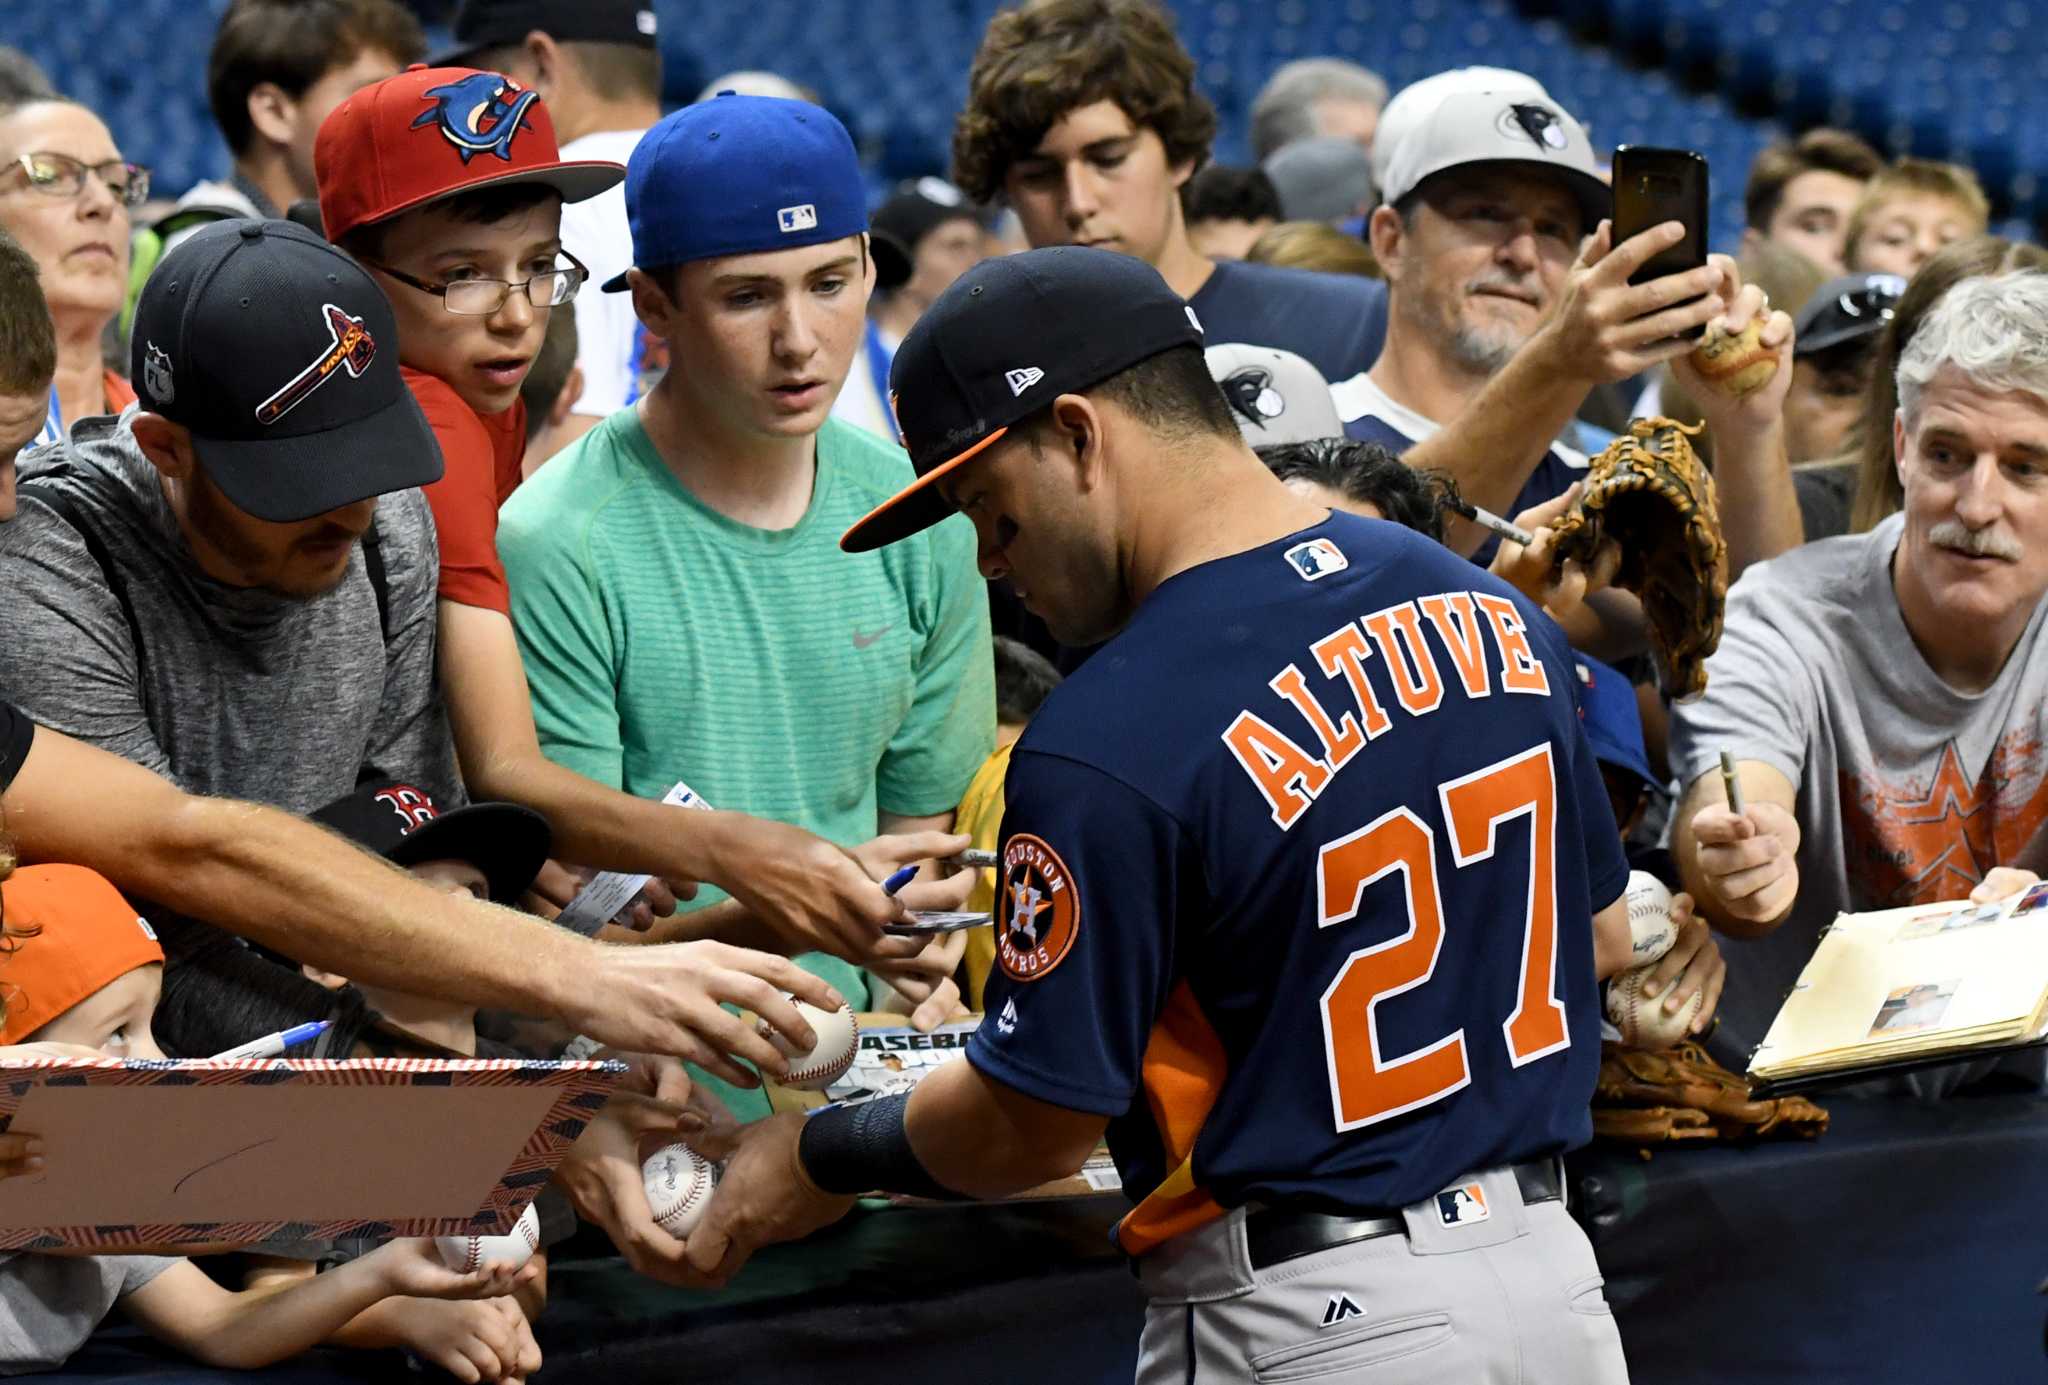 Astros players to sign autographs at select Academy stores